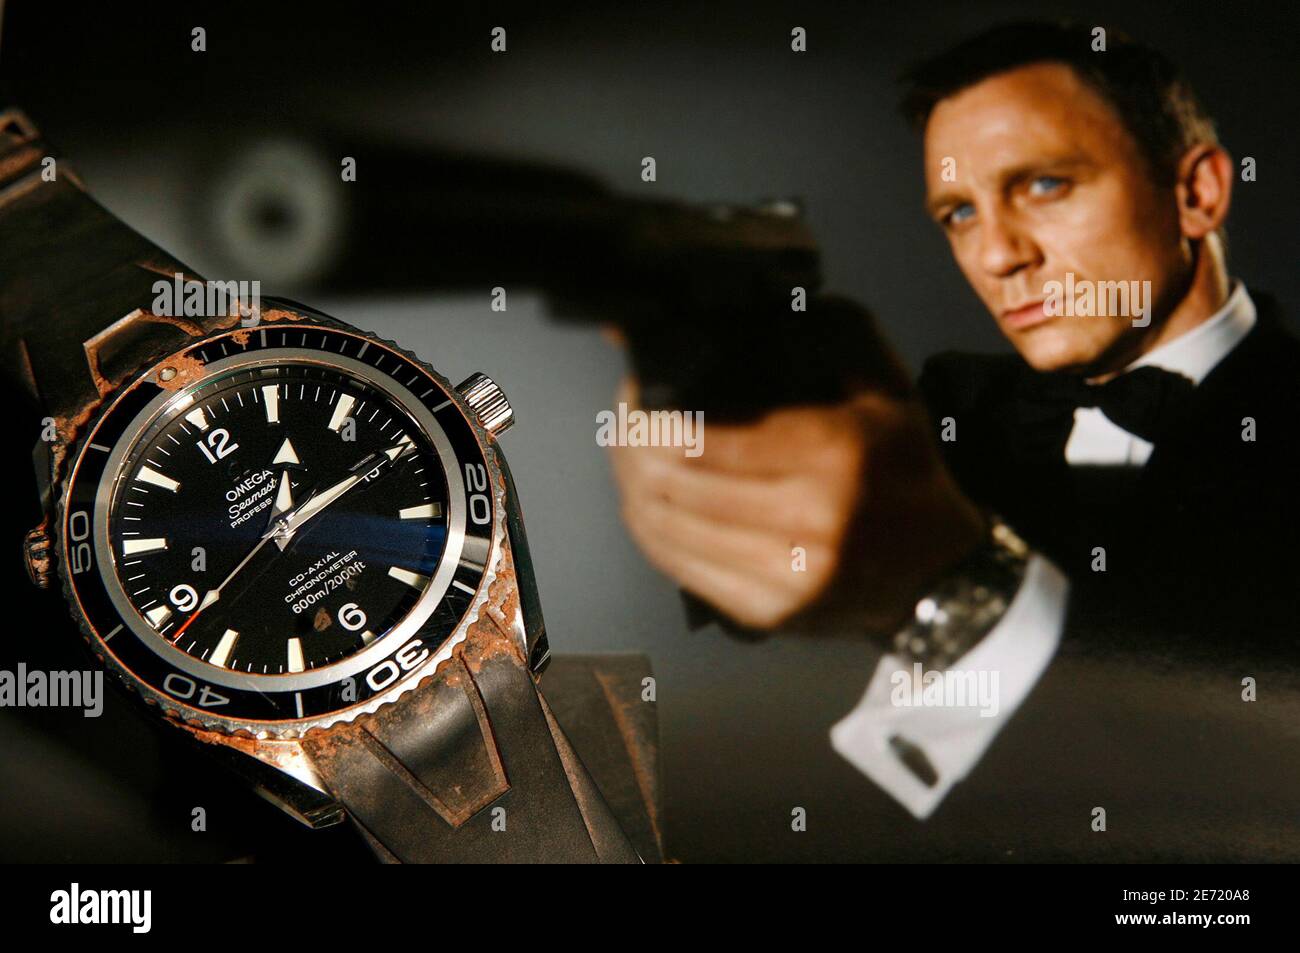 The Omega, 'Seamaster Planet Ocean' watch worn by Daniel Craig during the  filming of 'Casino Royale' in 2005/2006, is pictured in front of a  promotional photo during a preview at Antiquorum auction